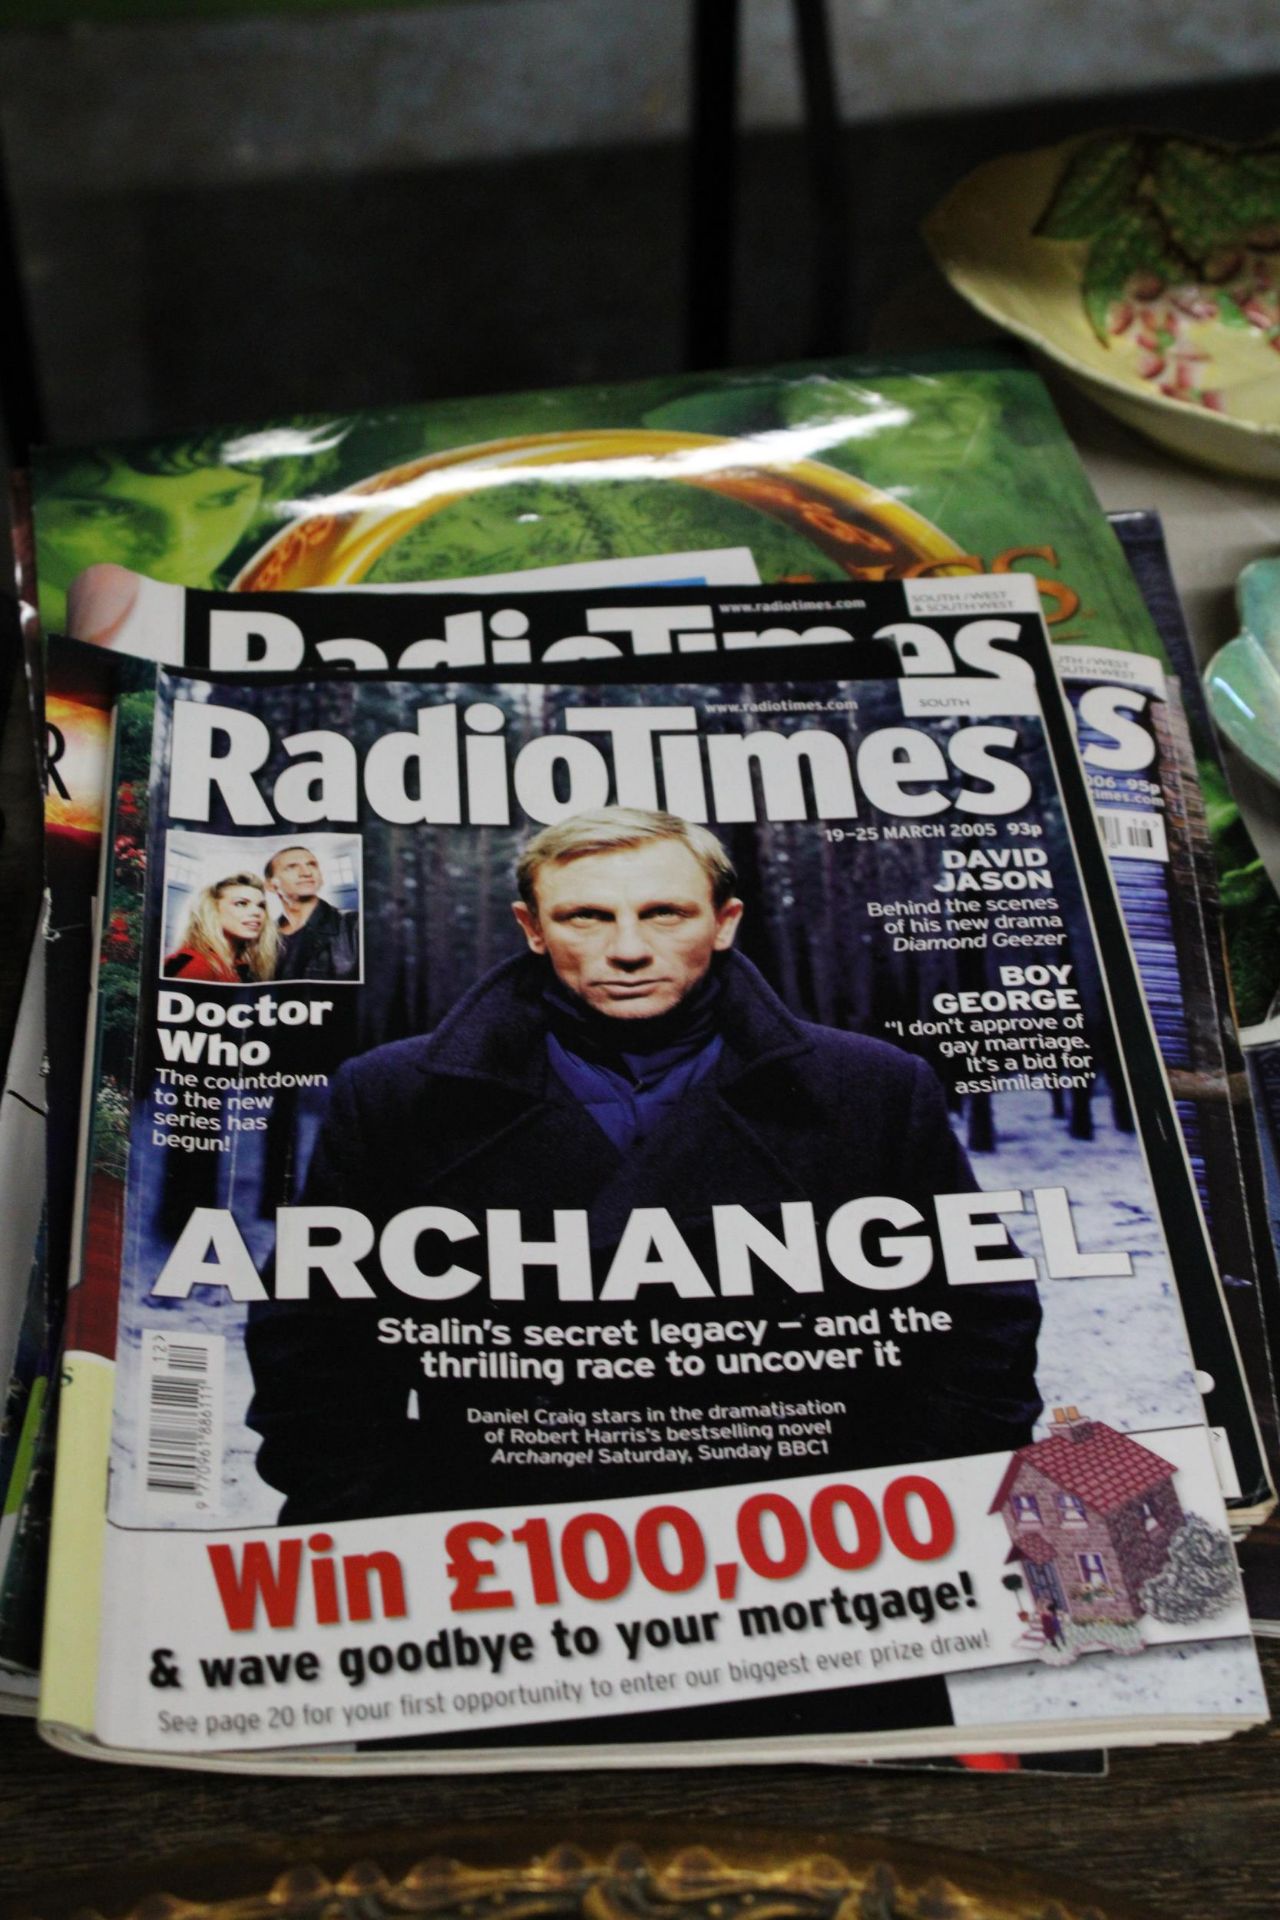 A QUANTITY OF EIGHT RADIO TIMES MAGAZINES WITH A FURTHER TWO LORD OF THE RINGS CALENDARS